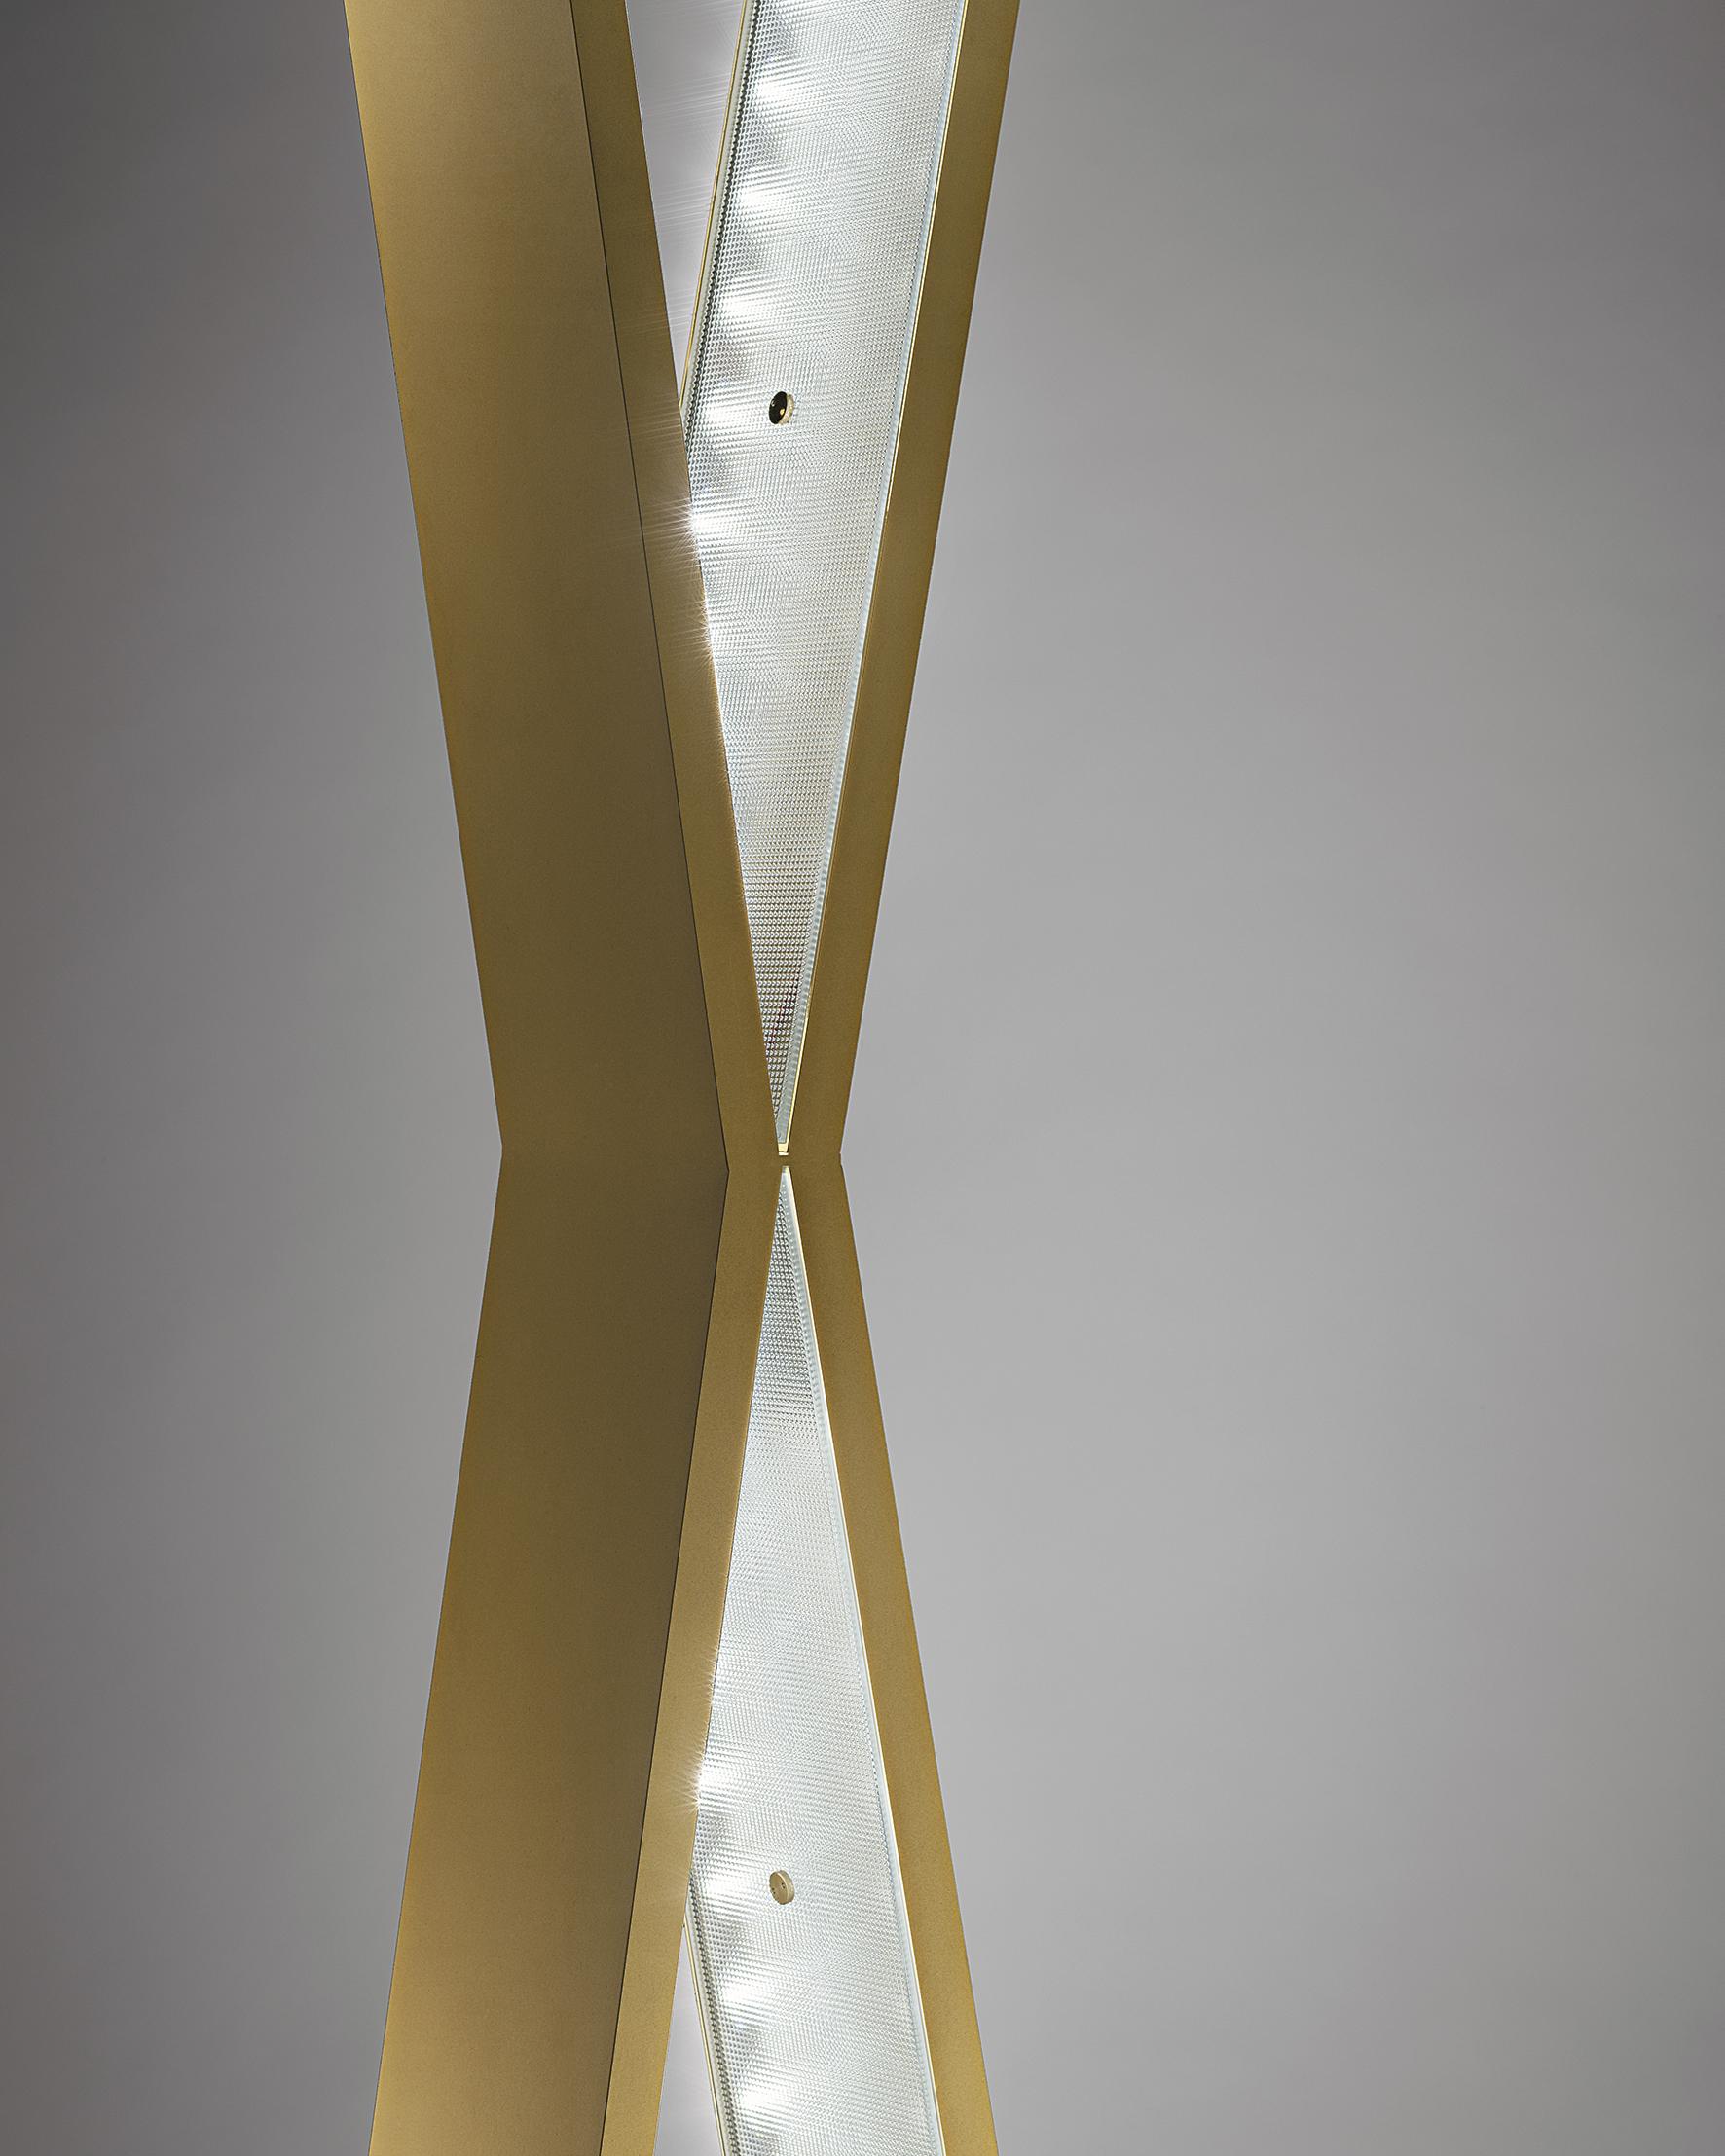 Please note that VAT is not included in the price.

A willowy brass X of which inner sides contain 12 LEDS, covered by sophisticated diamond cut glasses. Able to function as either a floor lamp or a suspension lamp, it has generous dimensions and